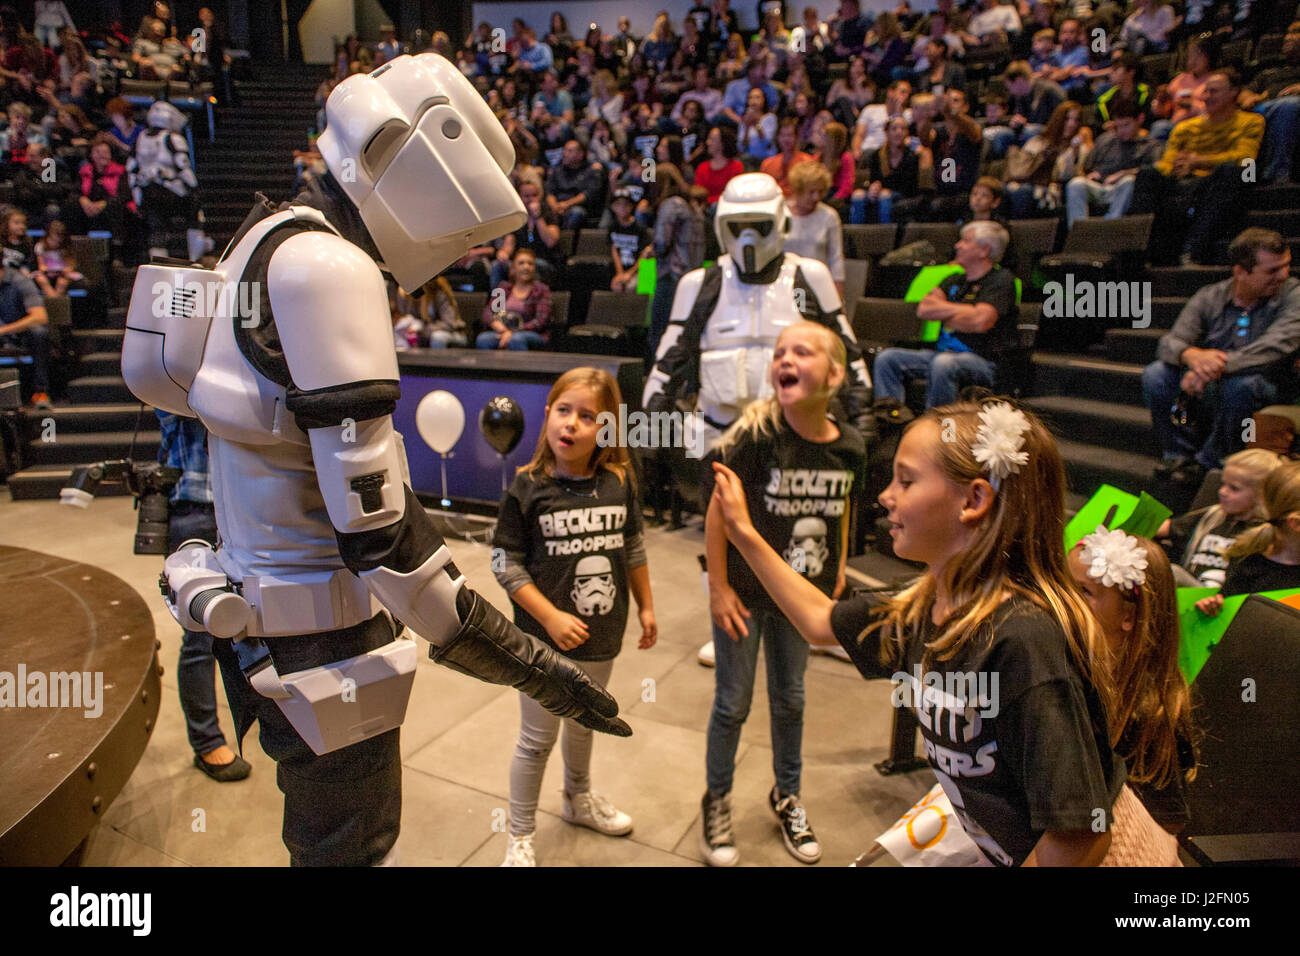 An actor costumed as a Stormtrooper from the futuristic science fiction movie Star Wars exchanges high fives with girls at an amphtheatre in Foothill Ranch, CA. Stock Photo